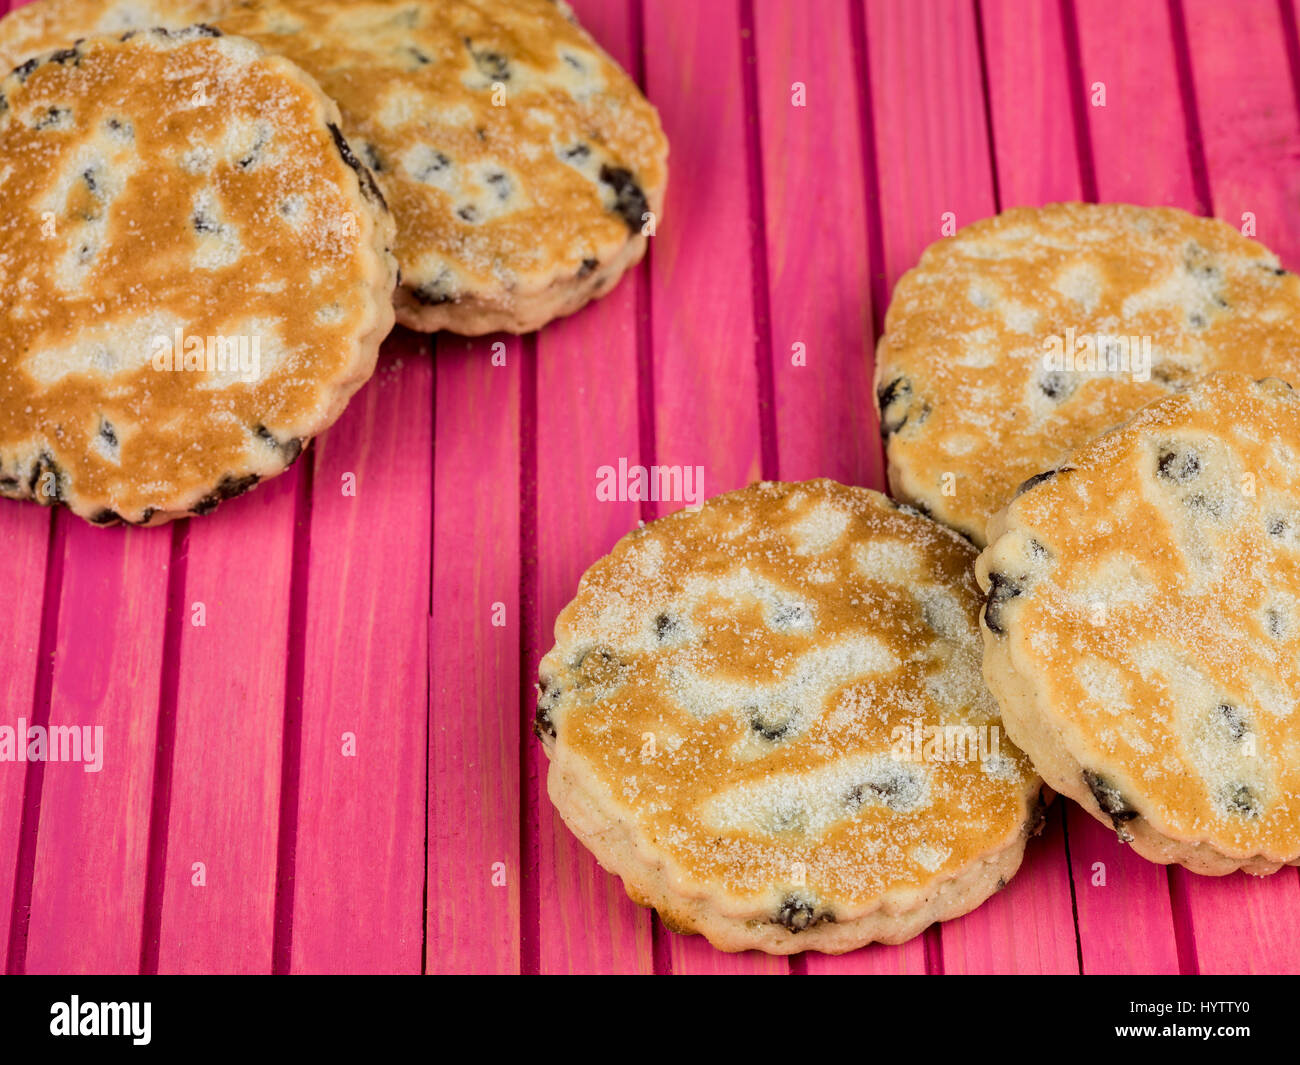 Baked Fruit Welsh Cakes Against a Pink Background Stock Photo